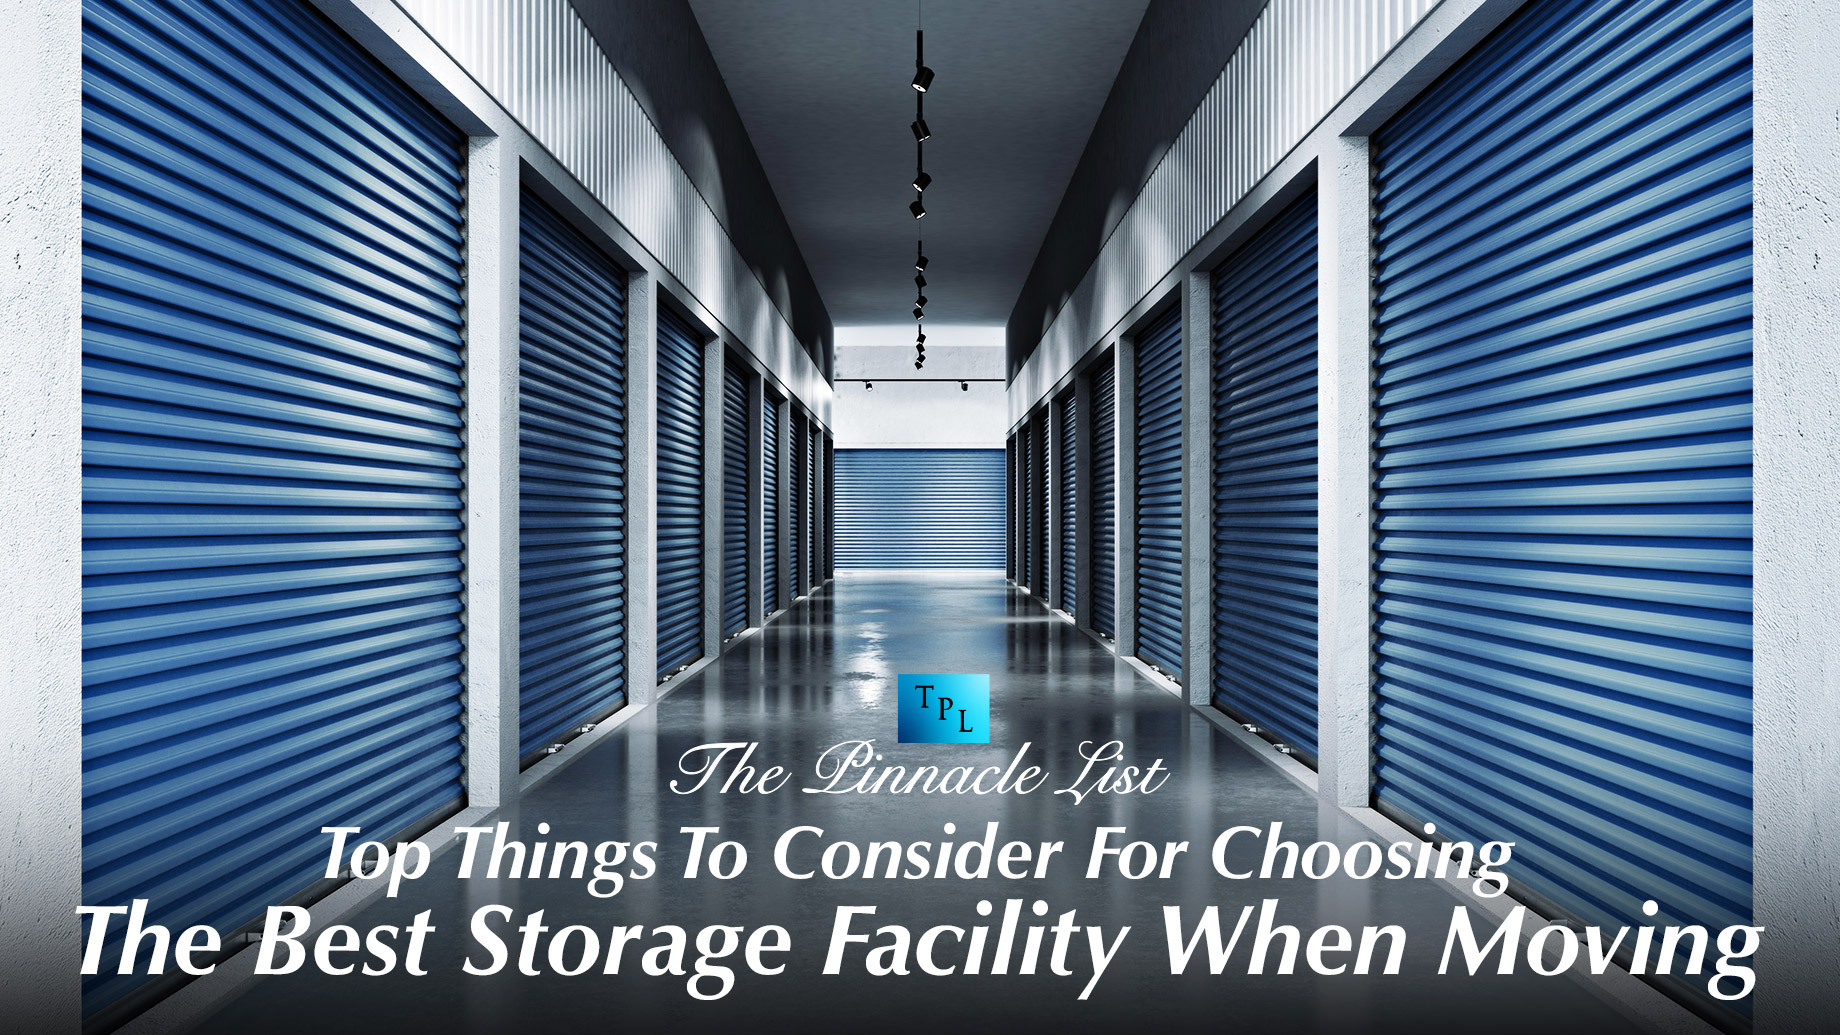 Top Things To Consider For Choosing The Best Storage Facility When Moving